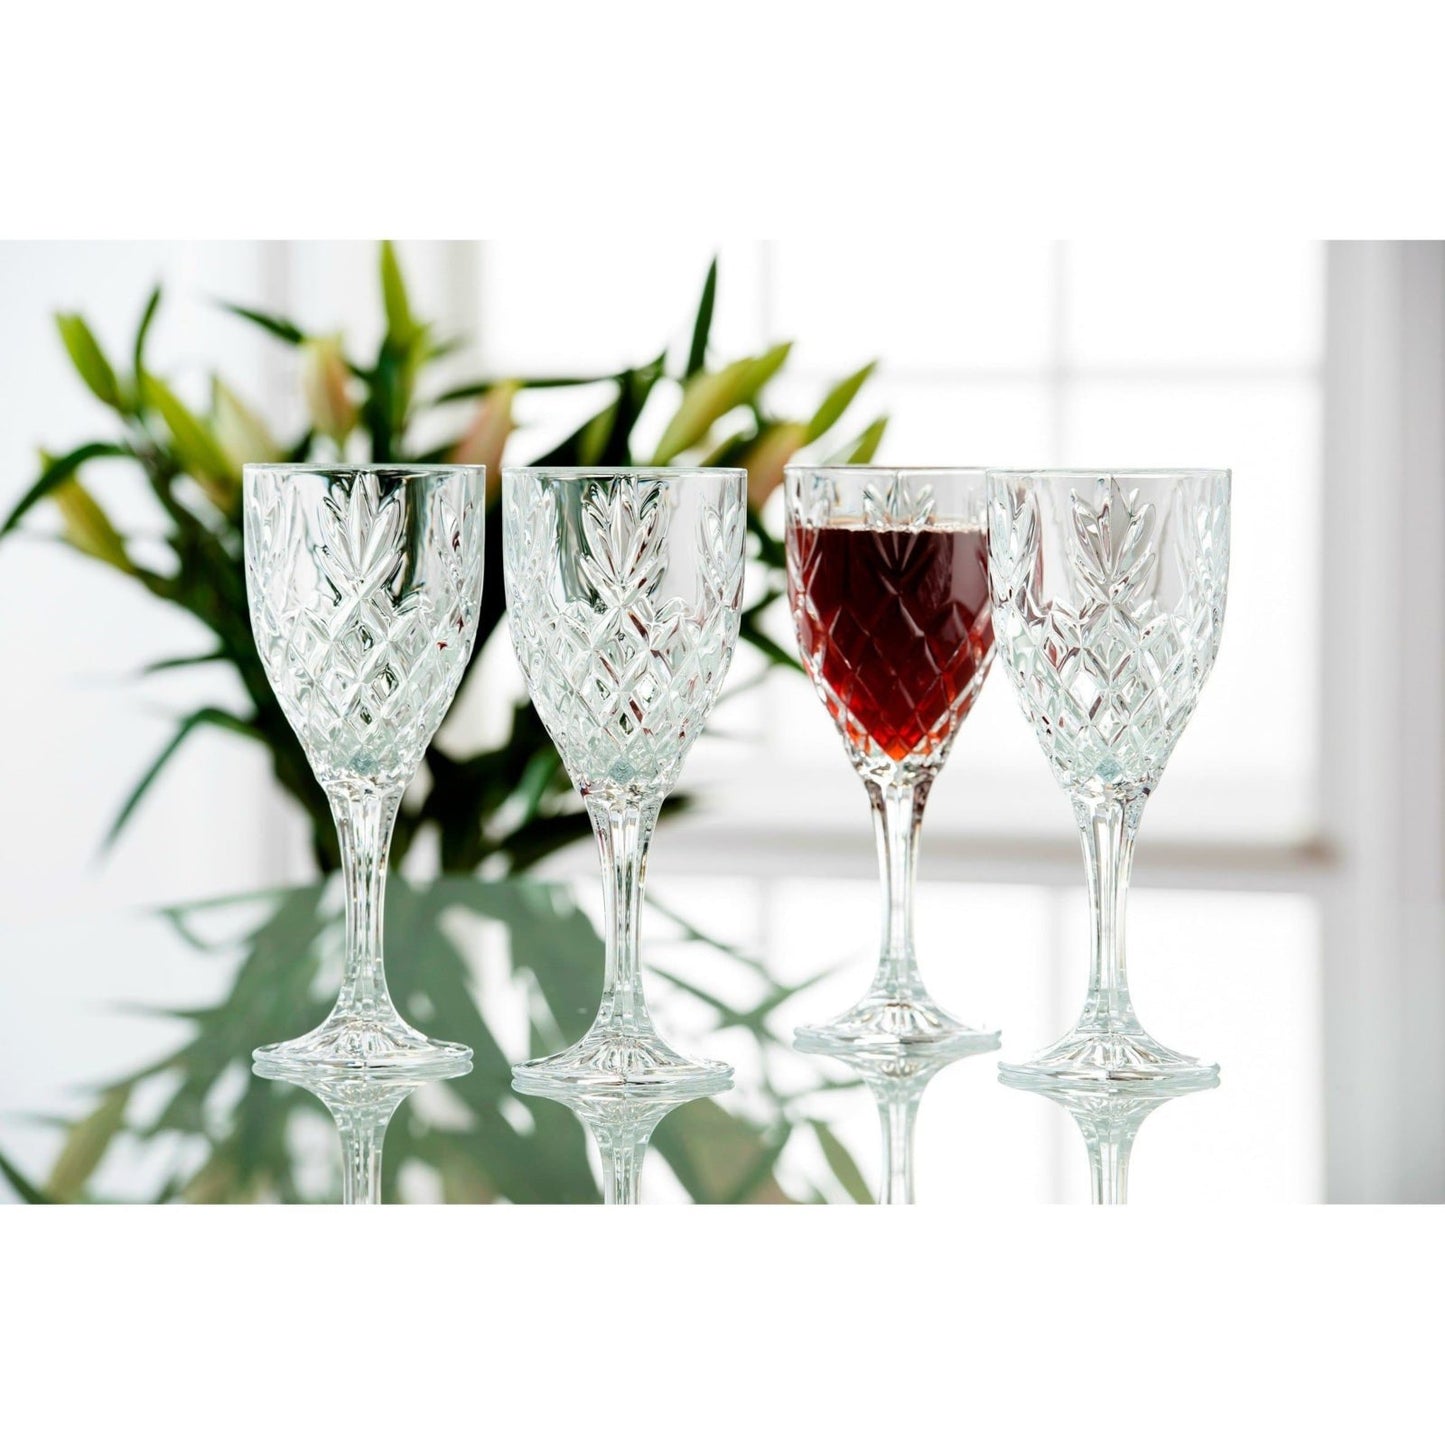 Renmore Goblets set of 4